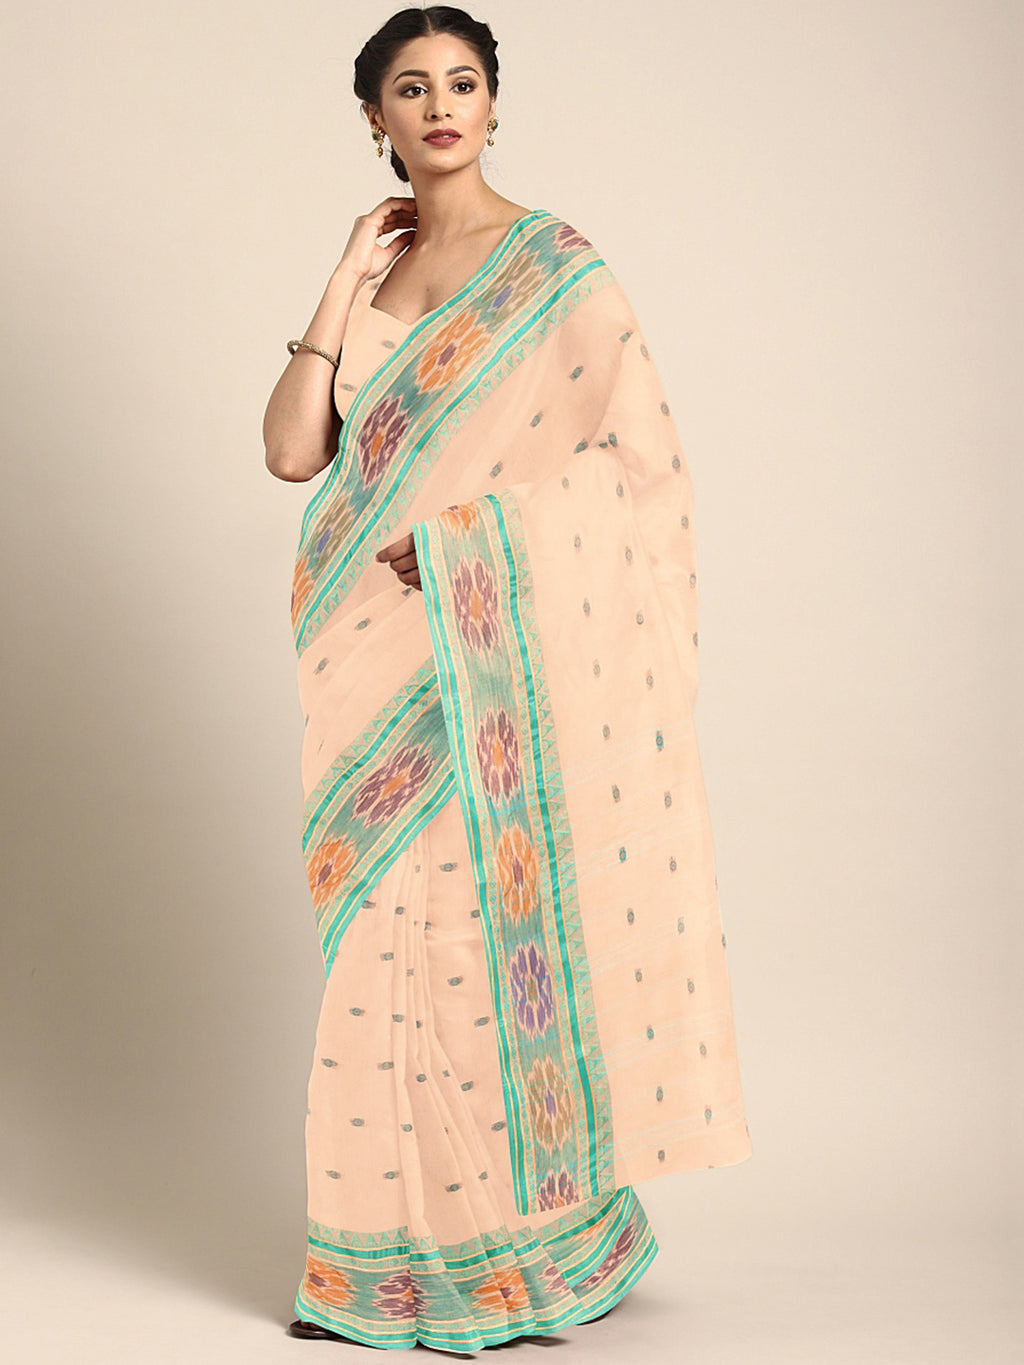 Peach Tant Woven Design Saree Without Blouse Piece DUTASA055 DUTASA055-Saree-Kalakari India-DUTASA055-Geographical Indication, Hand Crafted, Heritage Prints, Natural Dyes, Sarees, Silk Cotton, Sustainable Fabrics, Taant, Tant, West Bengal, Woven-[Linen,Ethnic,wear,Fashionista,Handloom,Handicraft,Indigo,blockprint,block,print,Cotton,Chanderi,Blue, latest,classy,party,bollywood,trendy,summer,style,traditional,formal,elegant,unique,style,hand,block,print, dabu,booti,gift,present,glamorous,affordabl